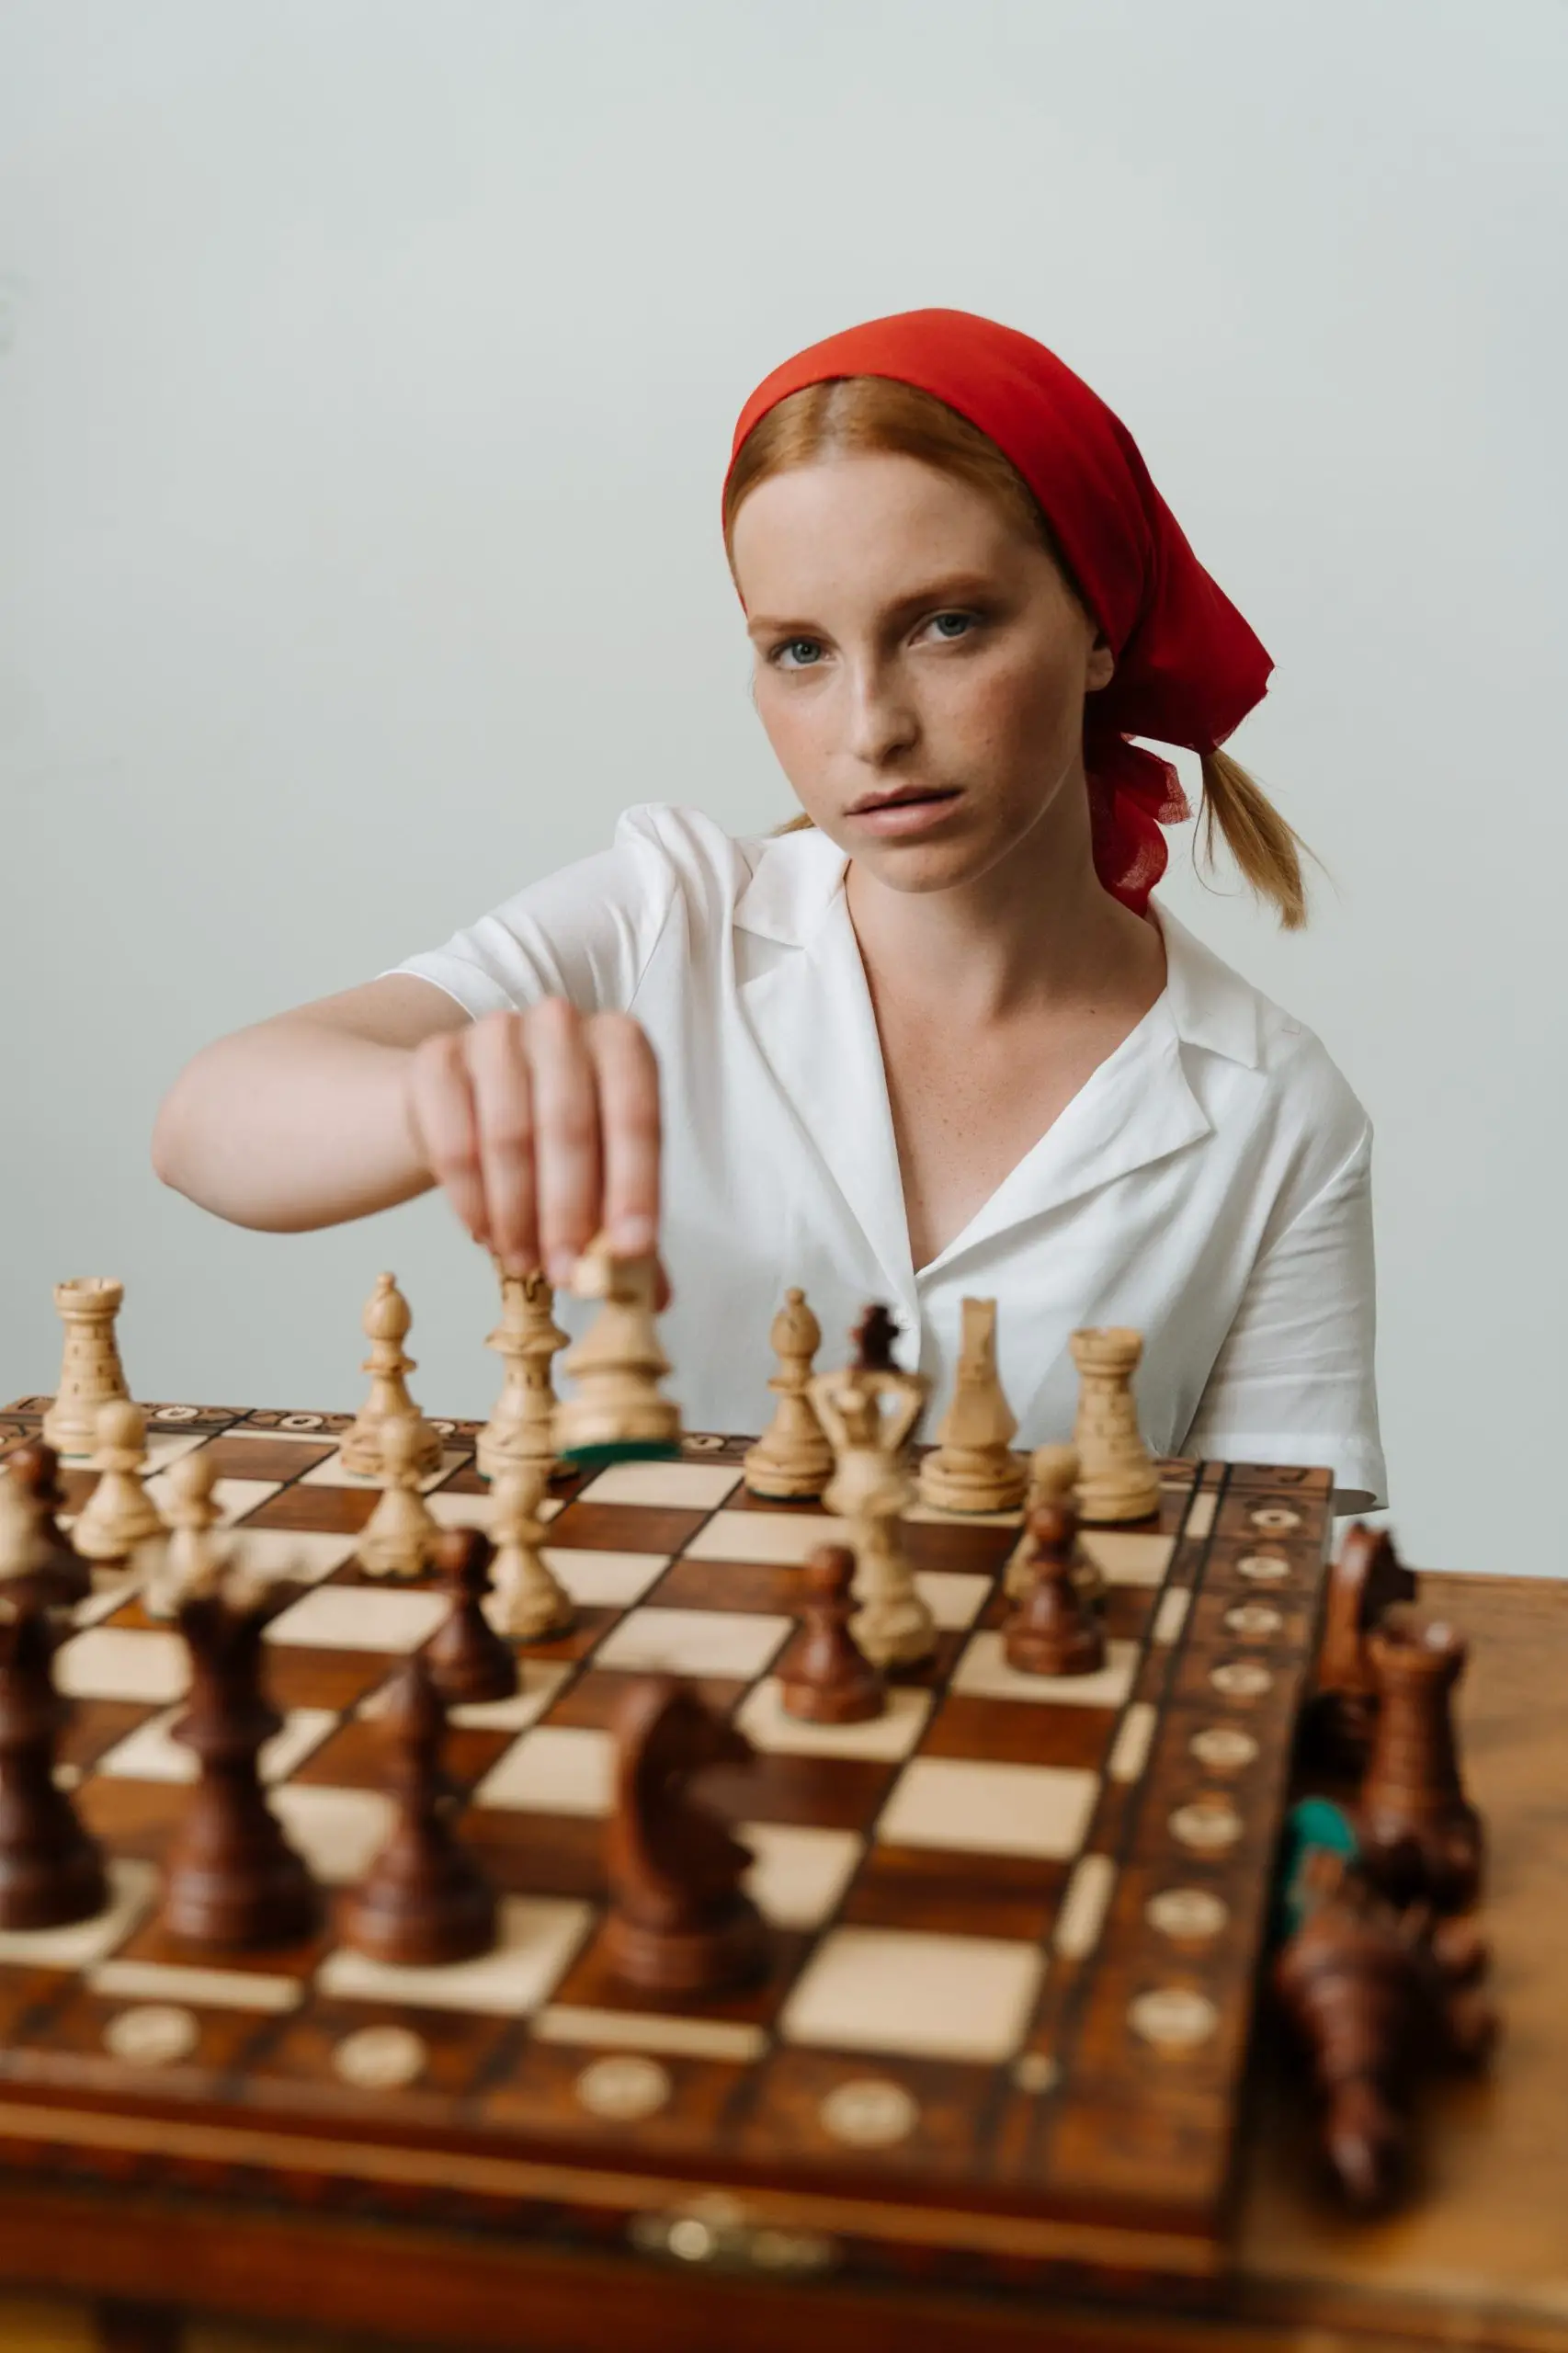 What is the Riskiest Move in Chess?